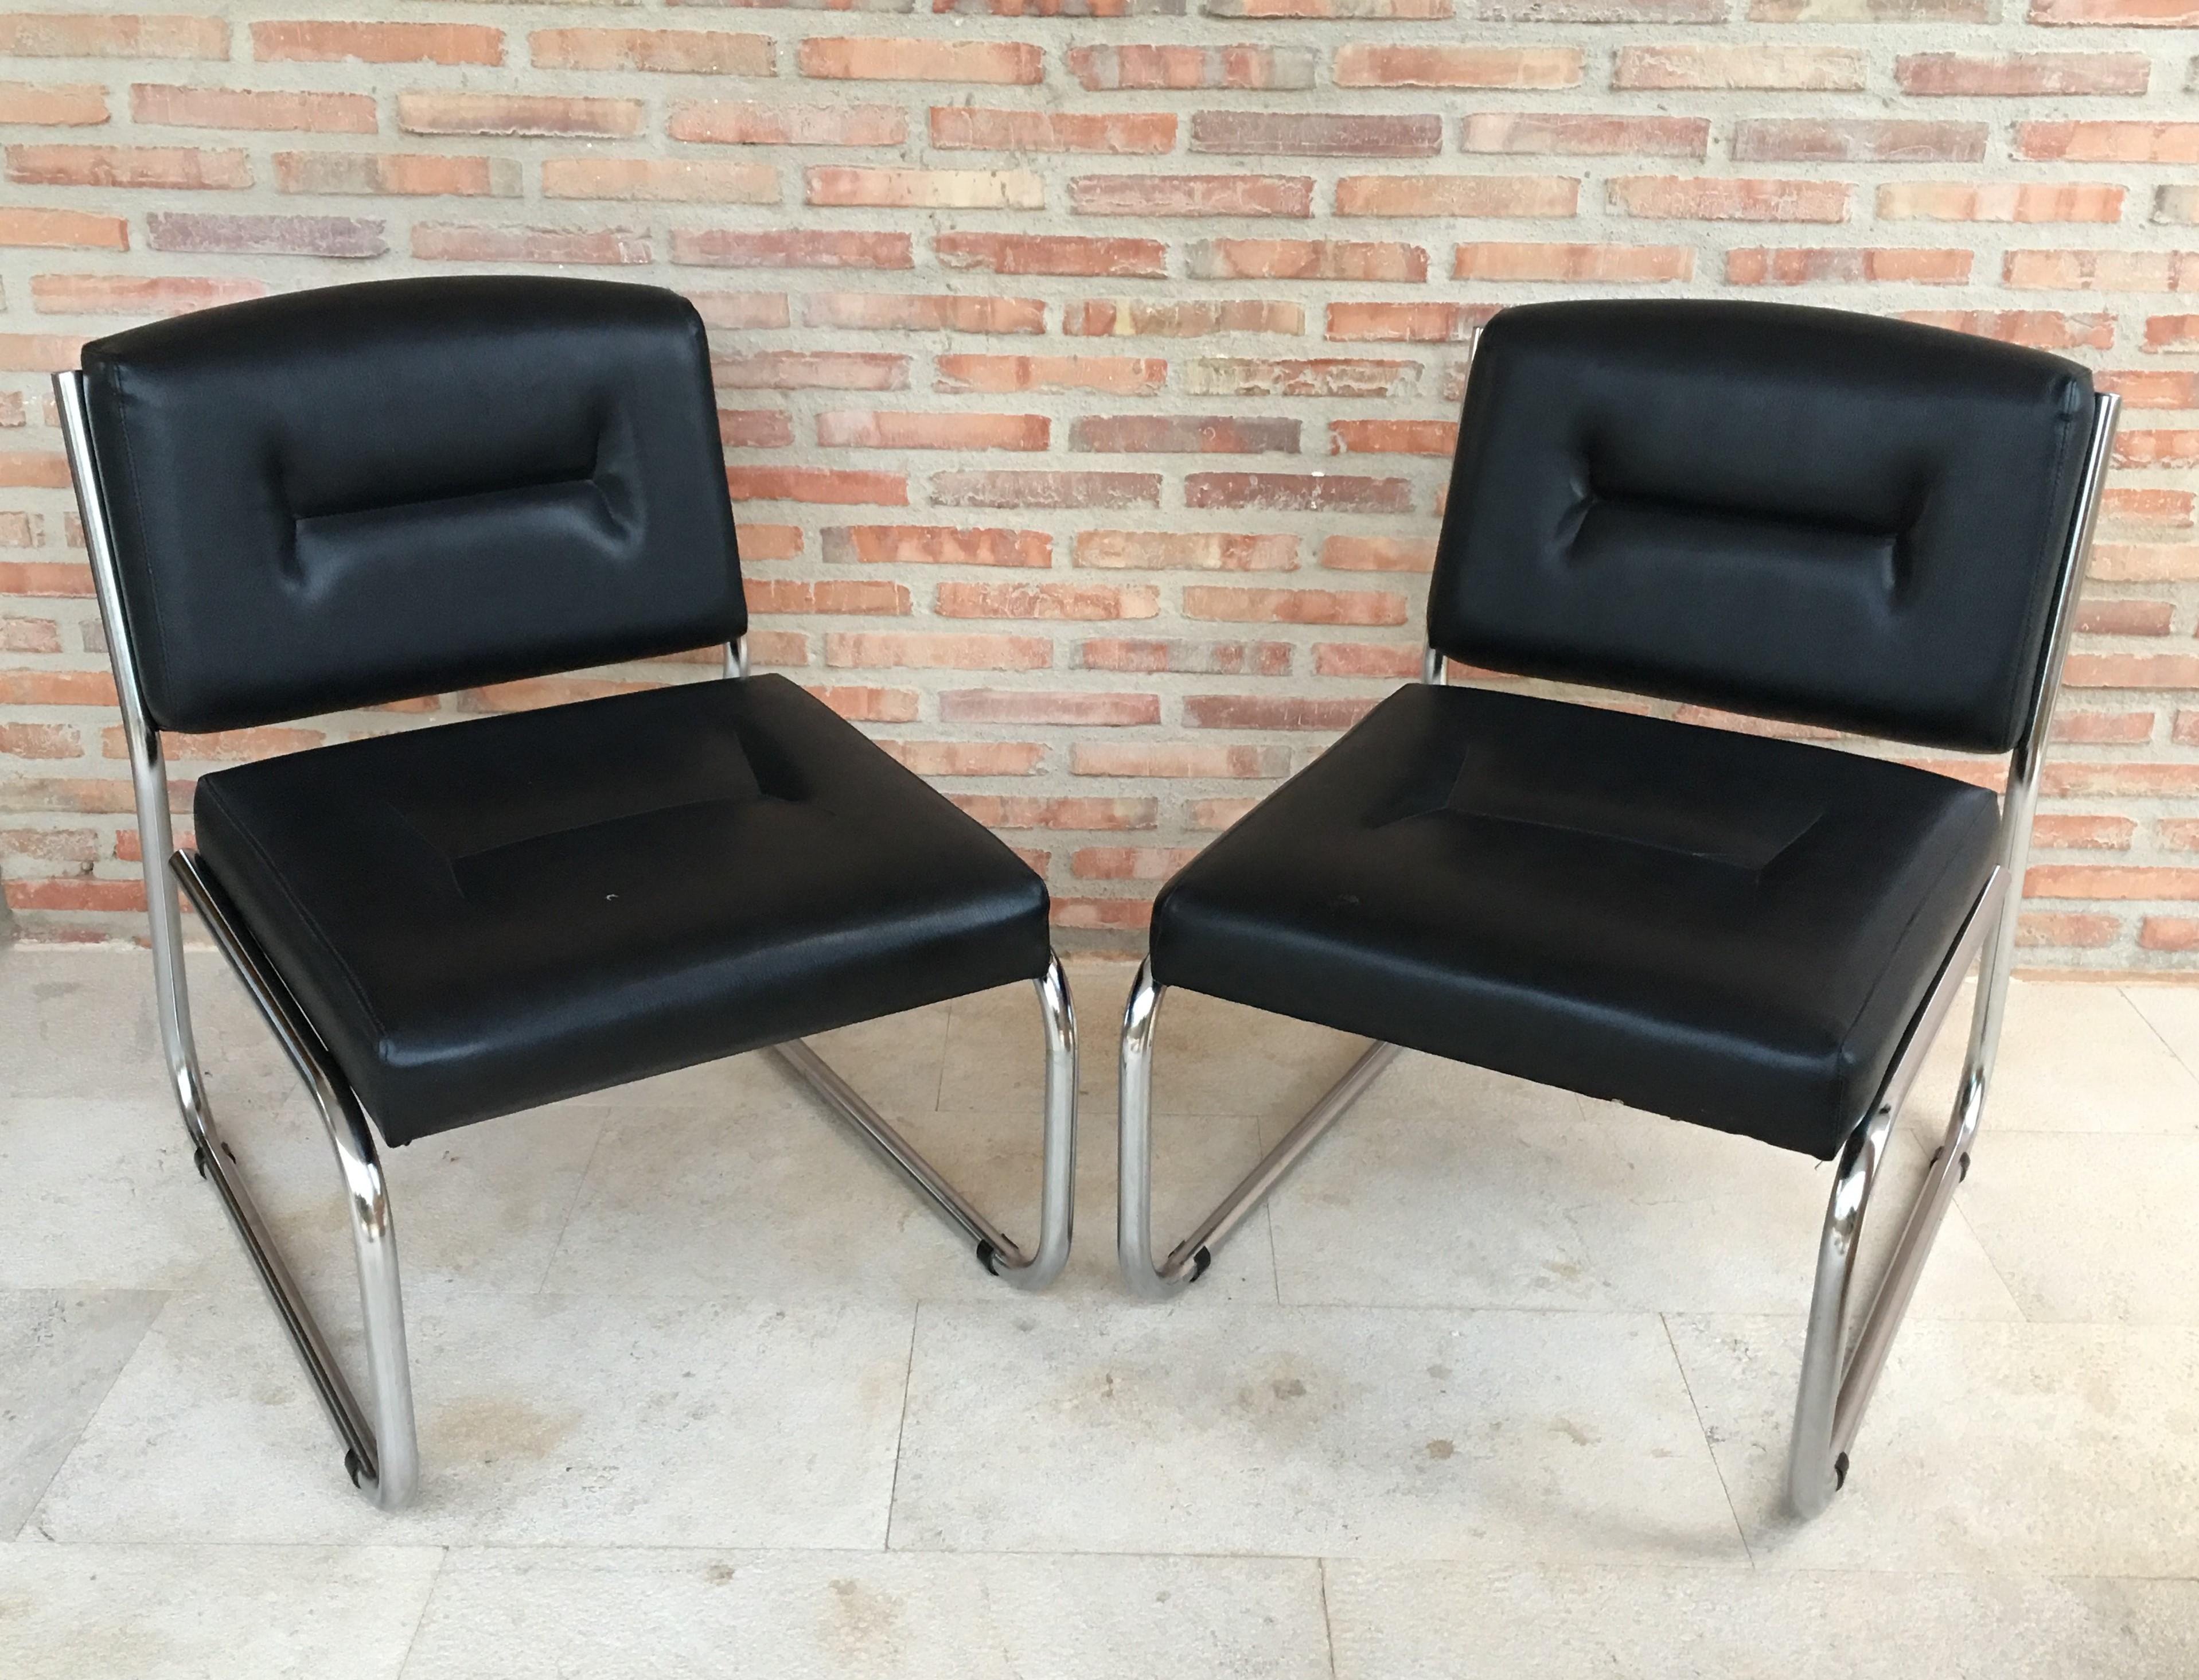 Pair of Art Deco Tubular Chrome Lounge Chairs in Black Leather 1